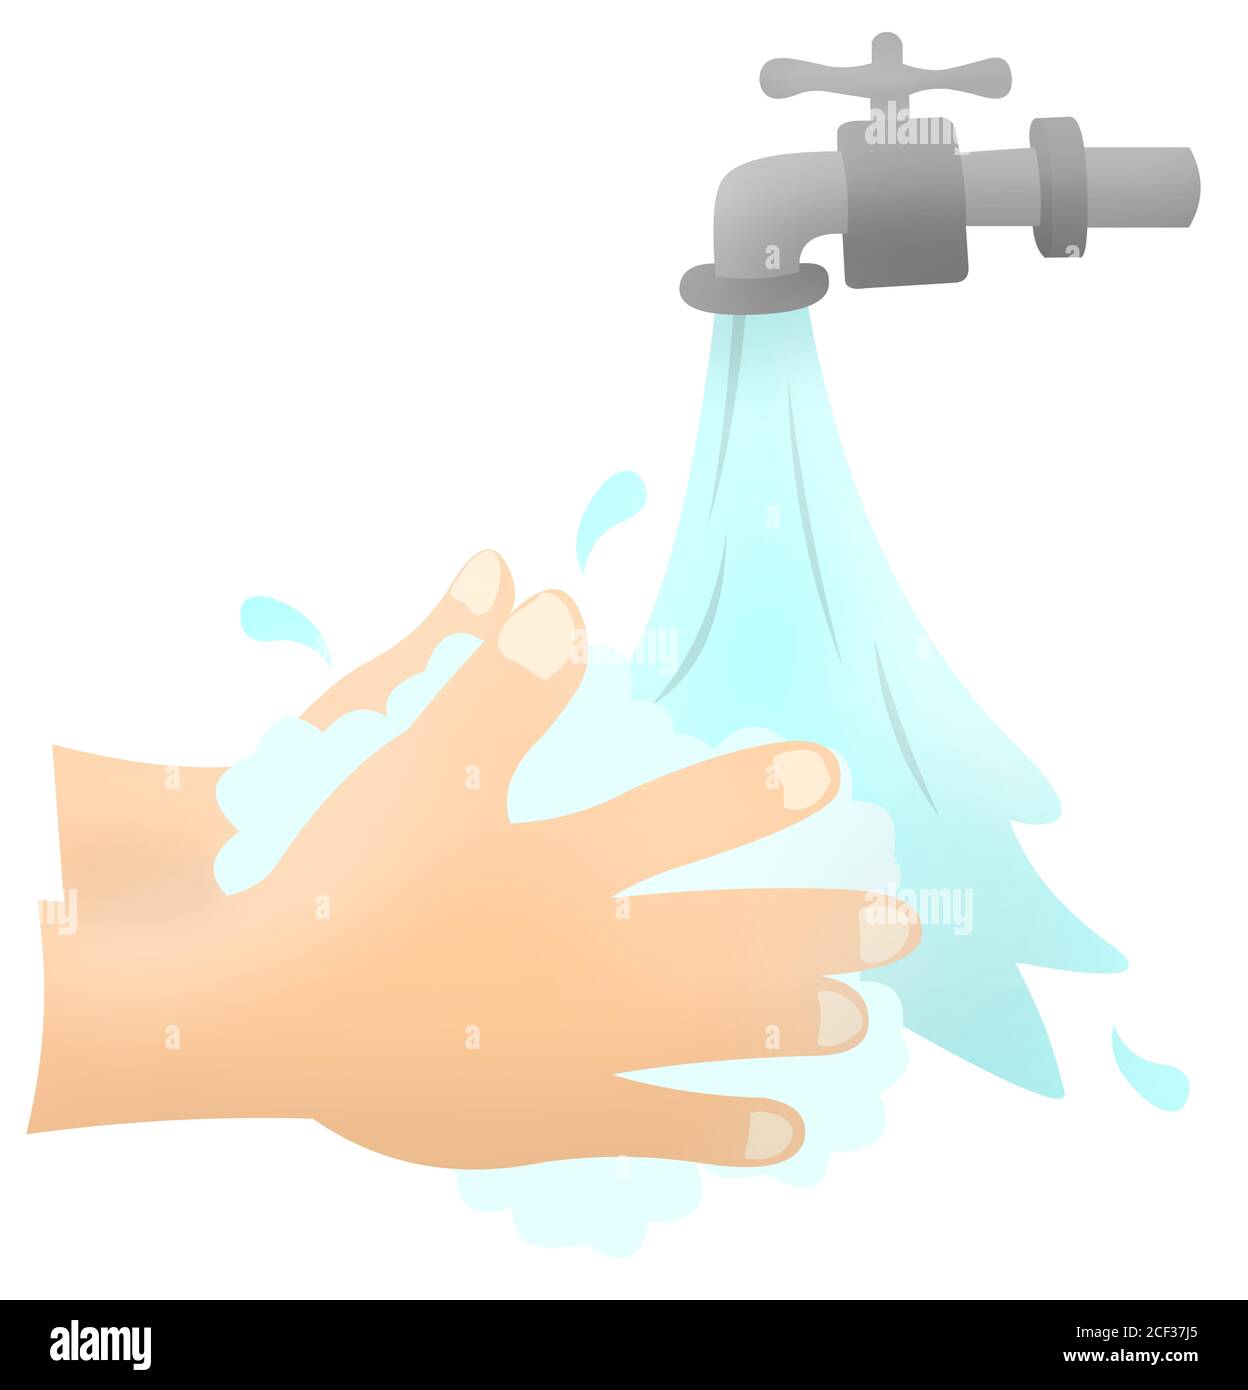 washing hands cartoon high quality. Wash hand concept 2d illustration. A  man or woman washing hands under faucet with soap and water. corona virus  pro Stock Photo - Alamy